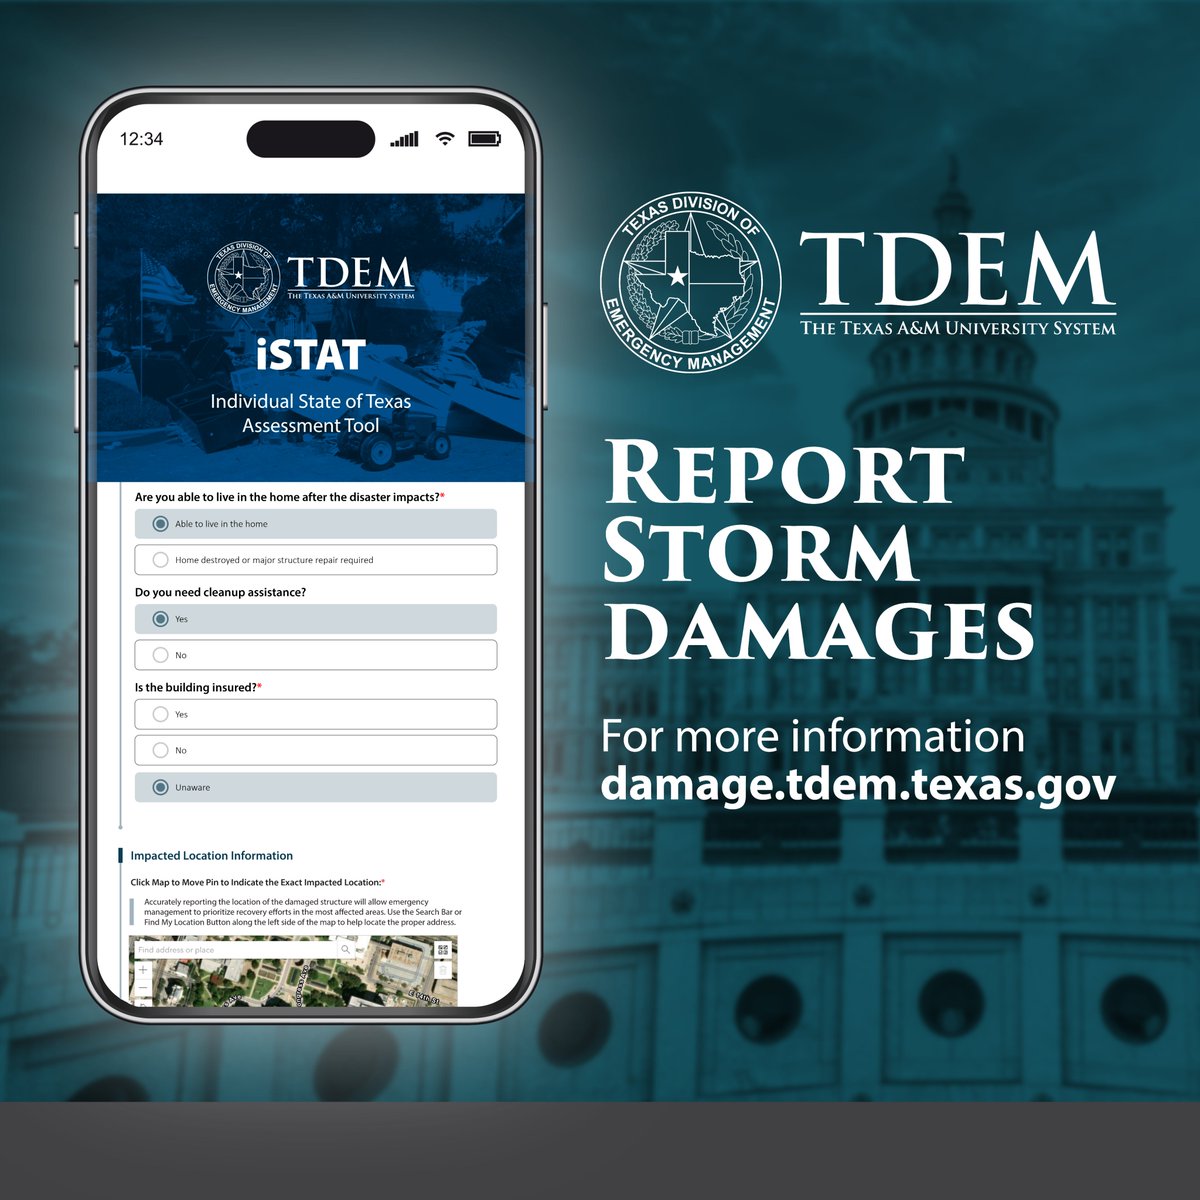 If you suffered property damage from recent severe storms and flooding, report your damage to TDEM.☔️ Submit a damage survey for homes and businesses here: damage.tdem.texas.gov This helps officials identify impacted areas & connect impacted Texans with recovery resources.